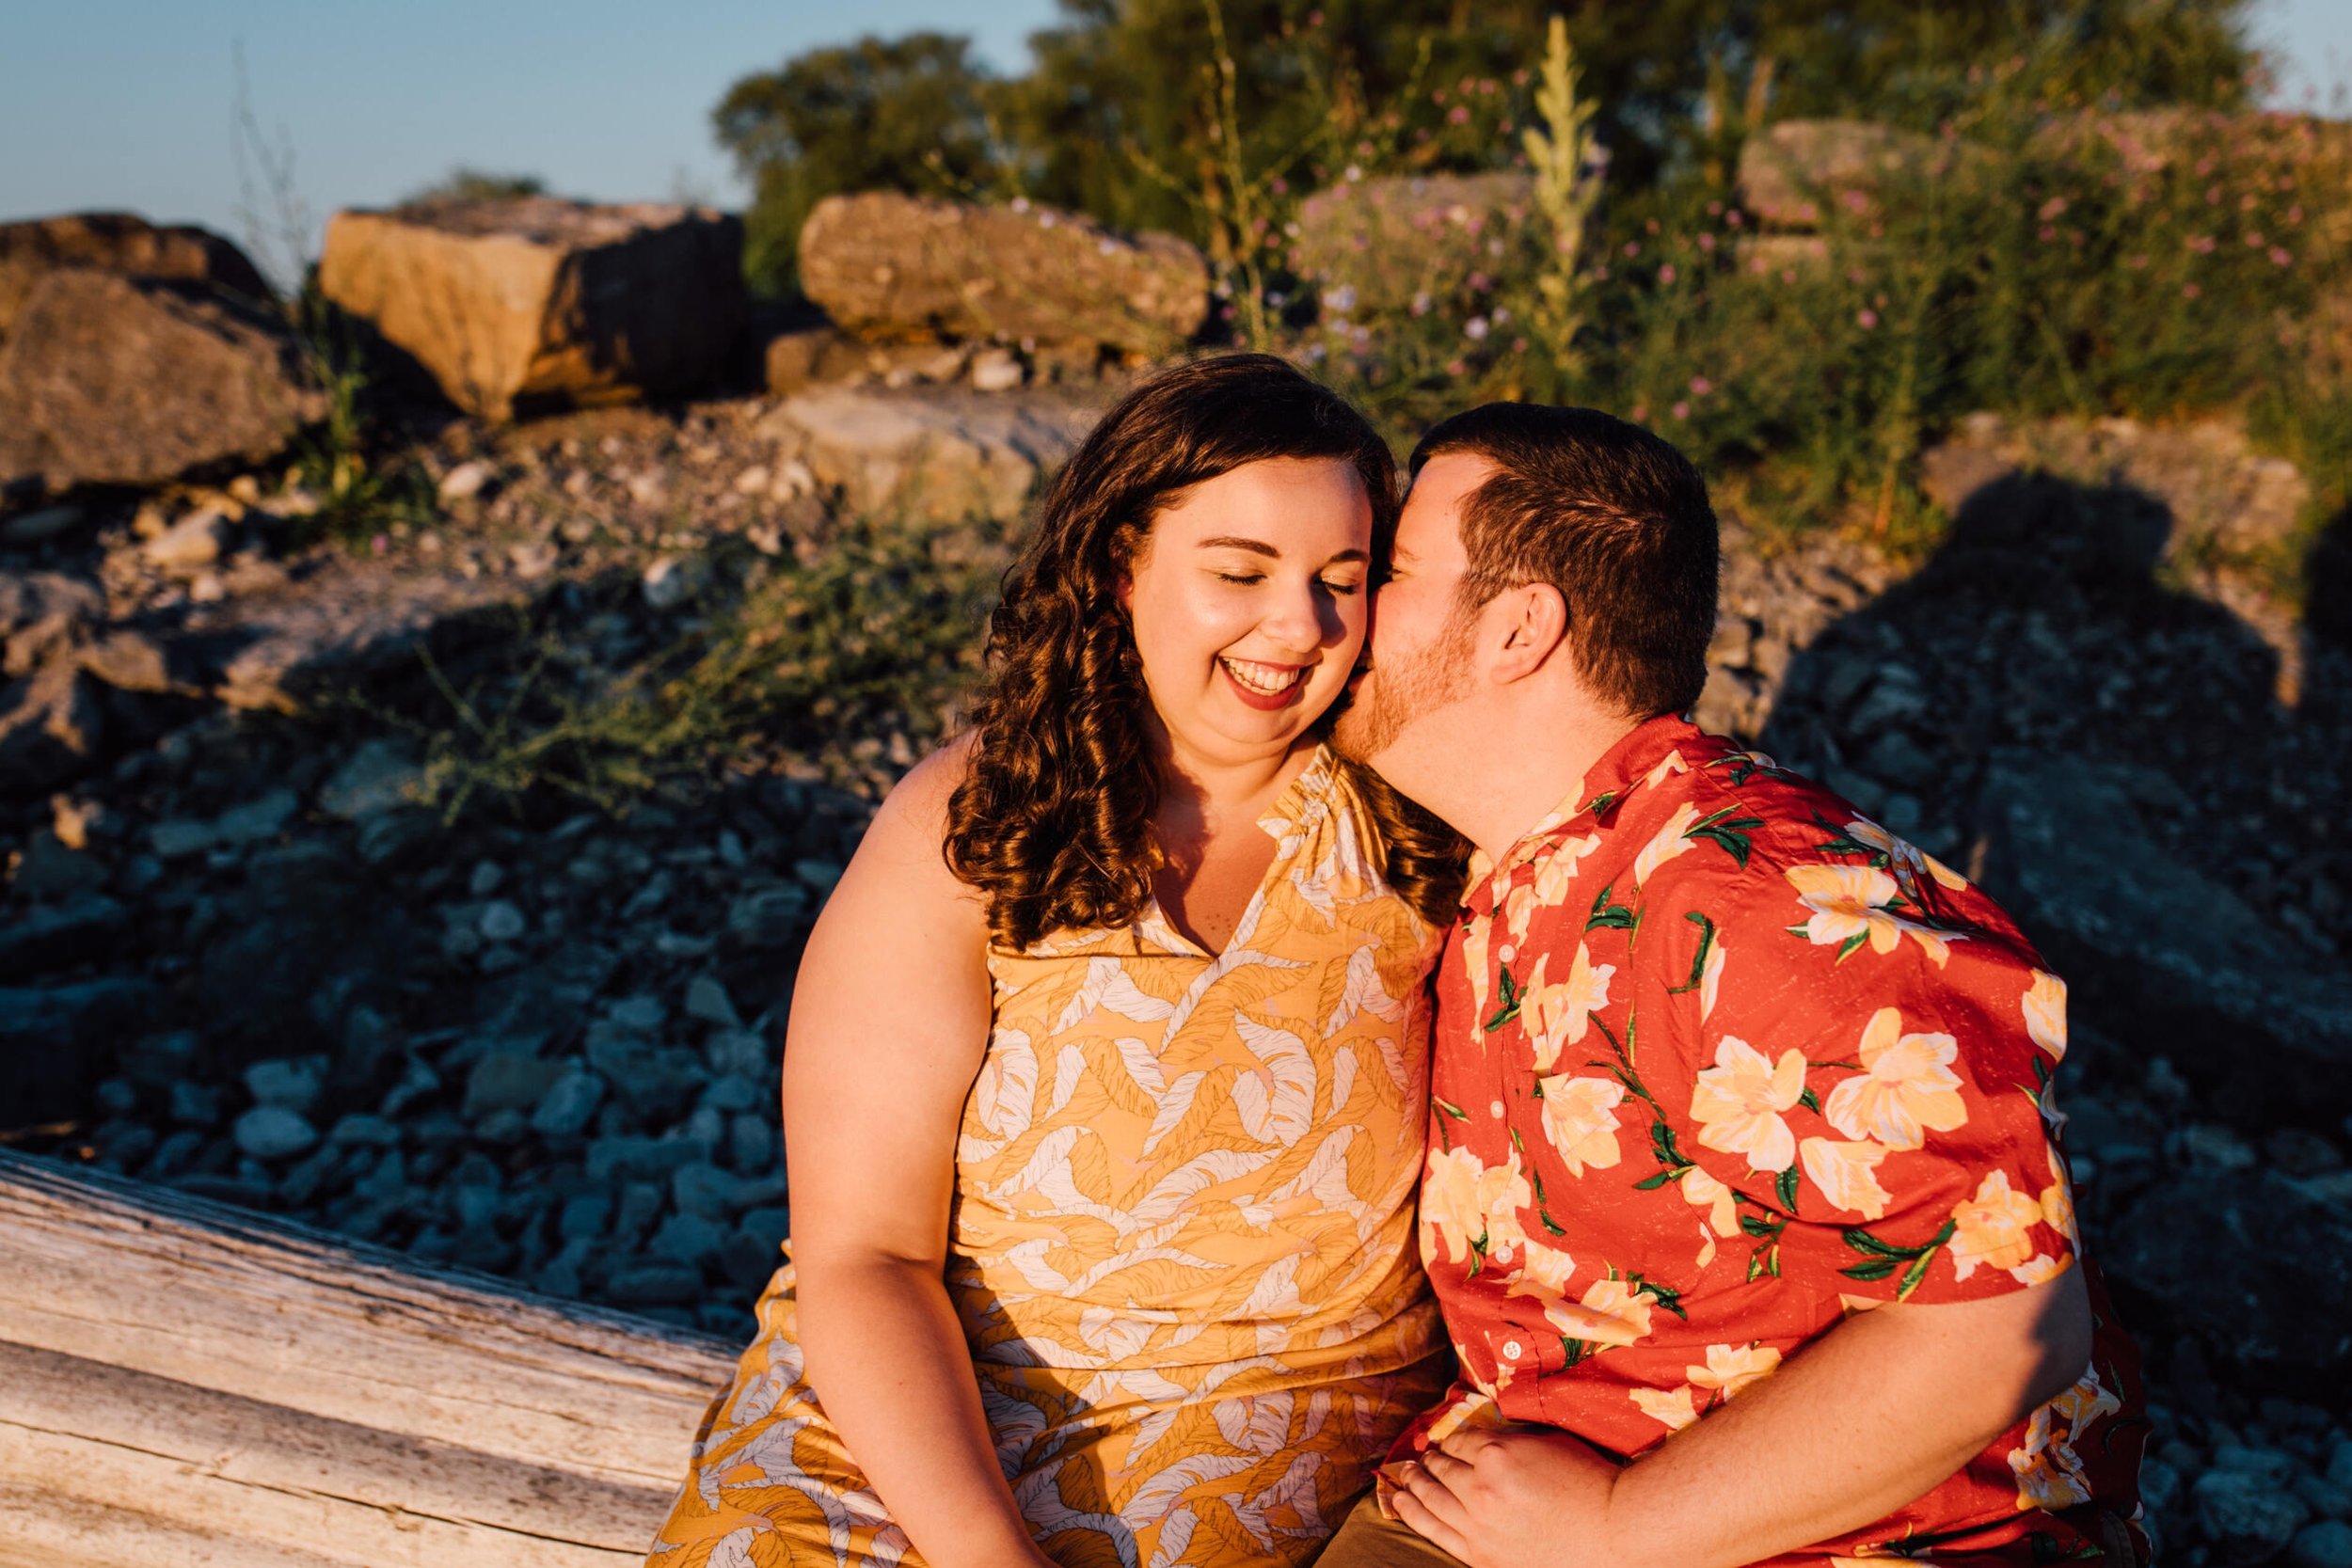  Brandon kisses his fiancé’s cheek as they sit on a log on a rocky beach for sunset engagement photos 